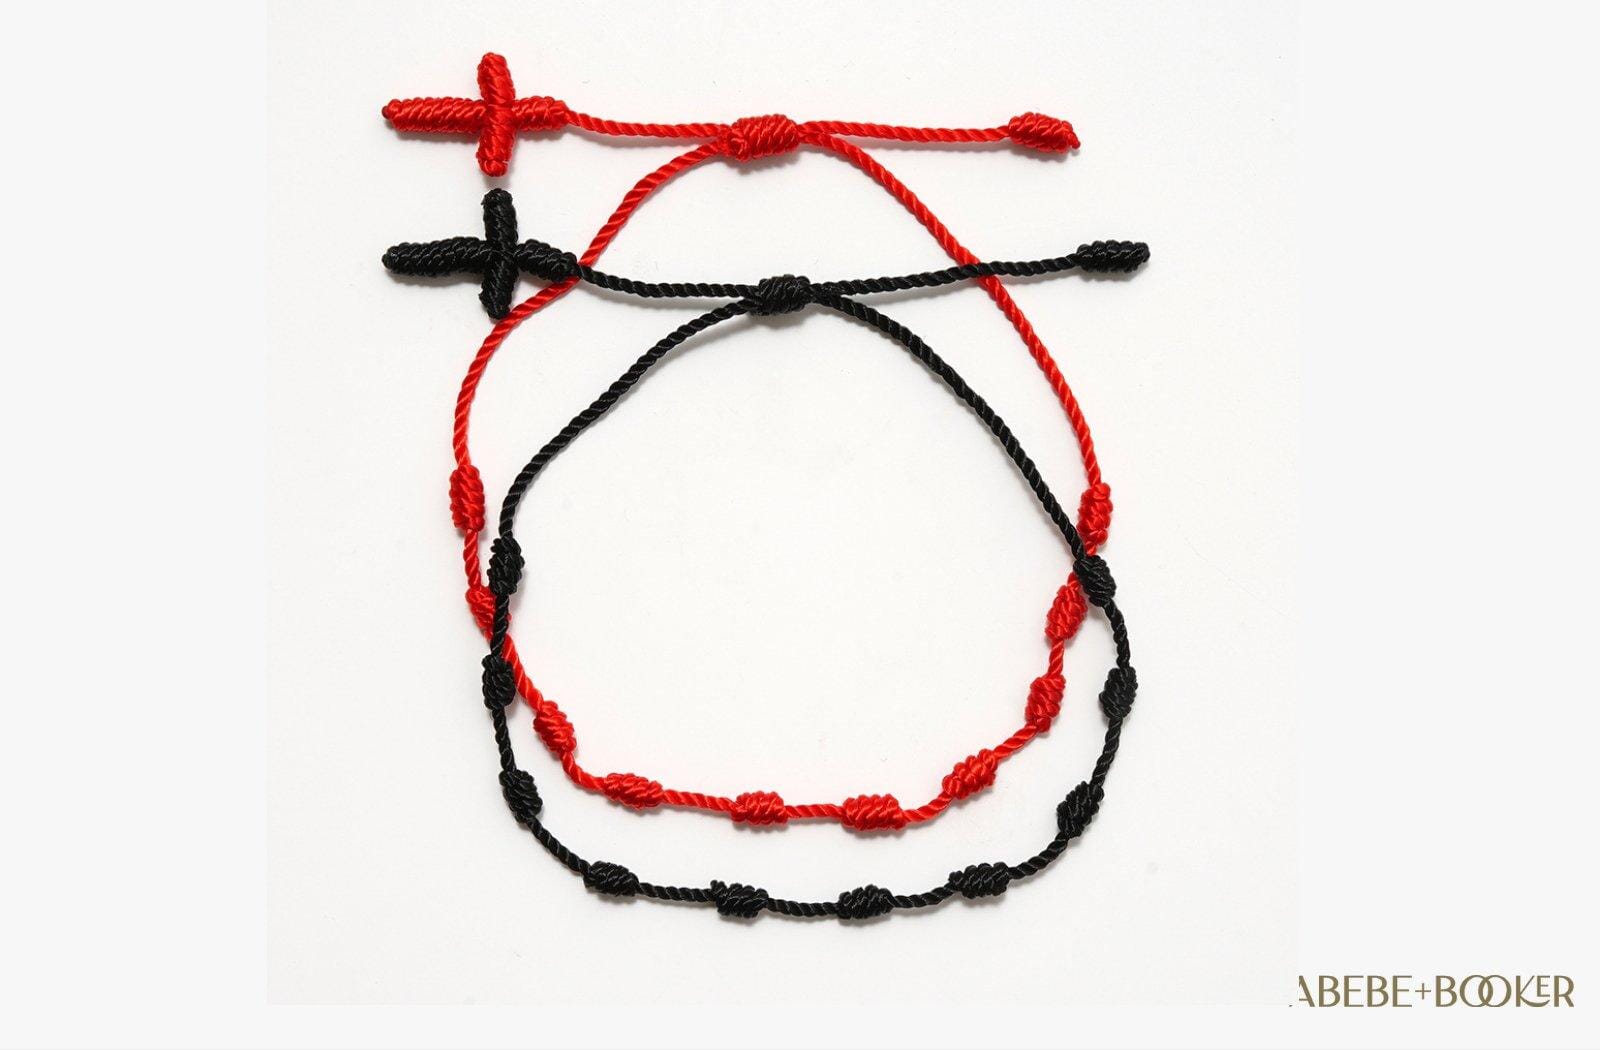 Red String Bracelet Meaning In Different Cultures